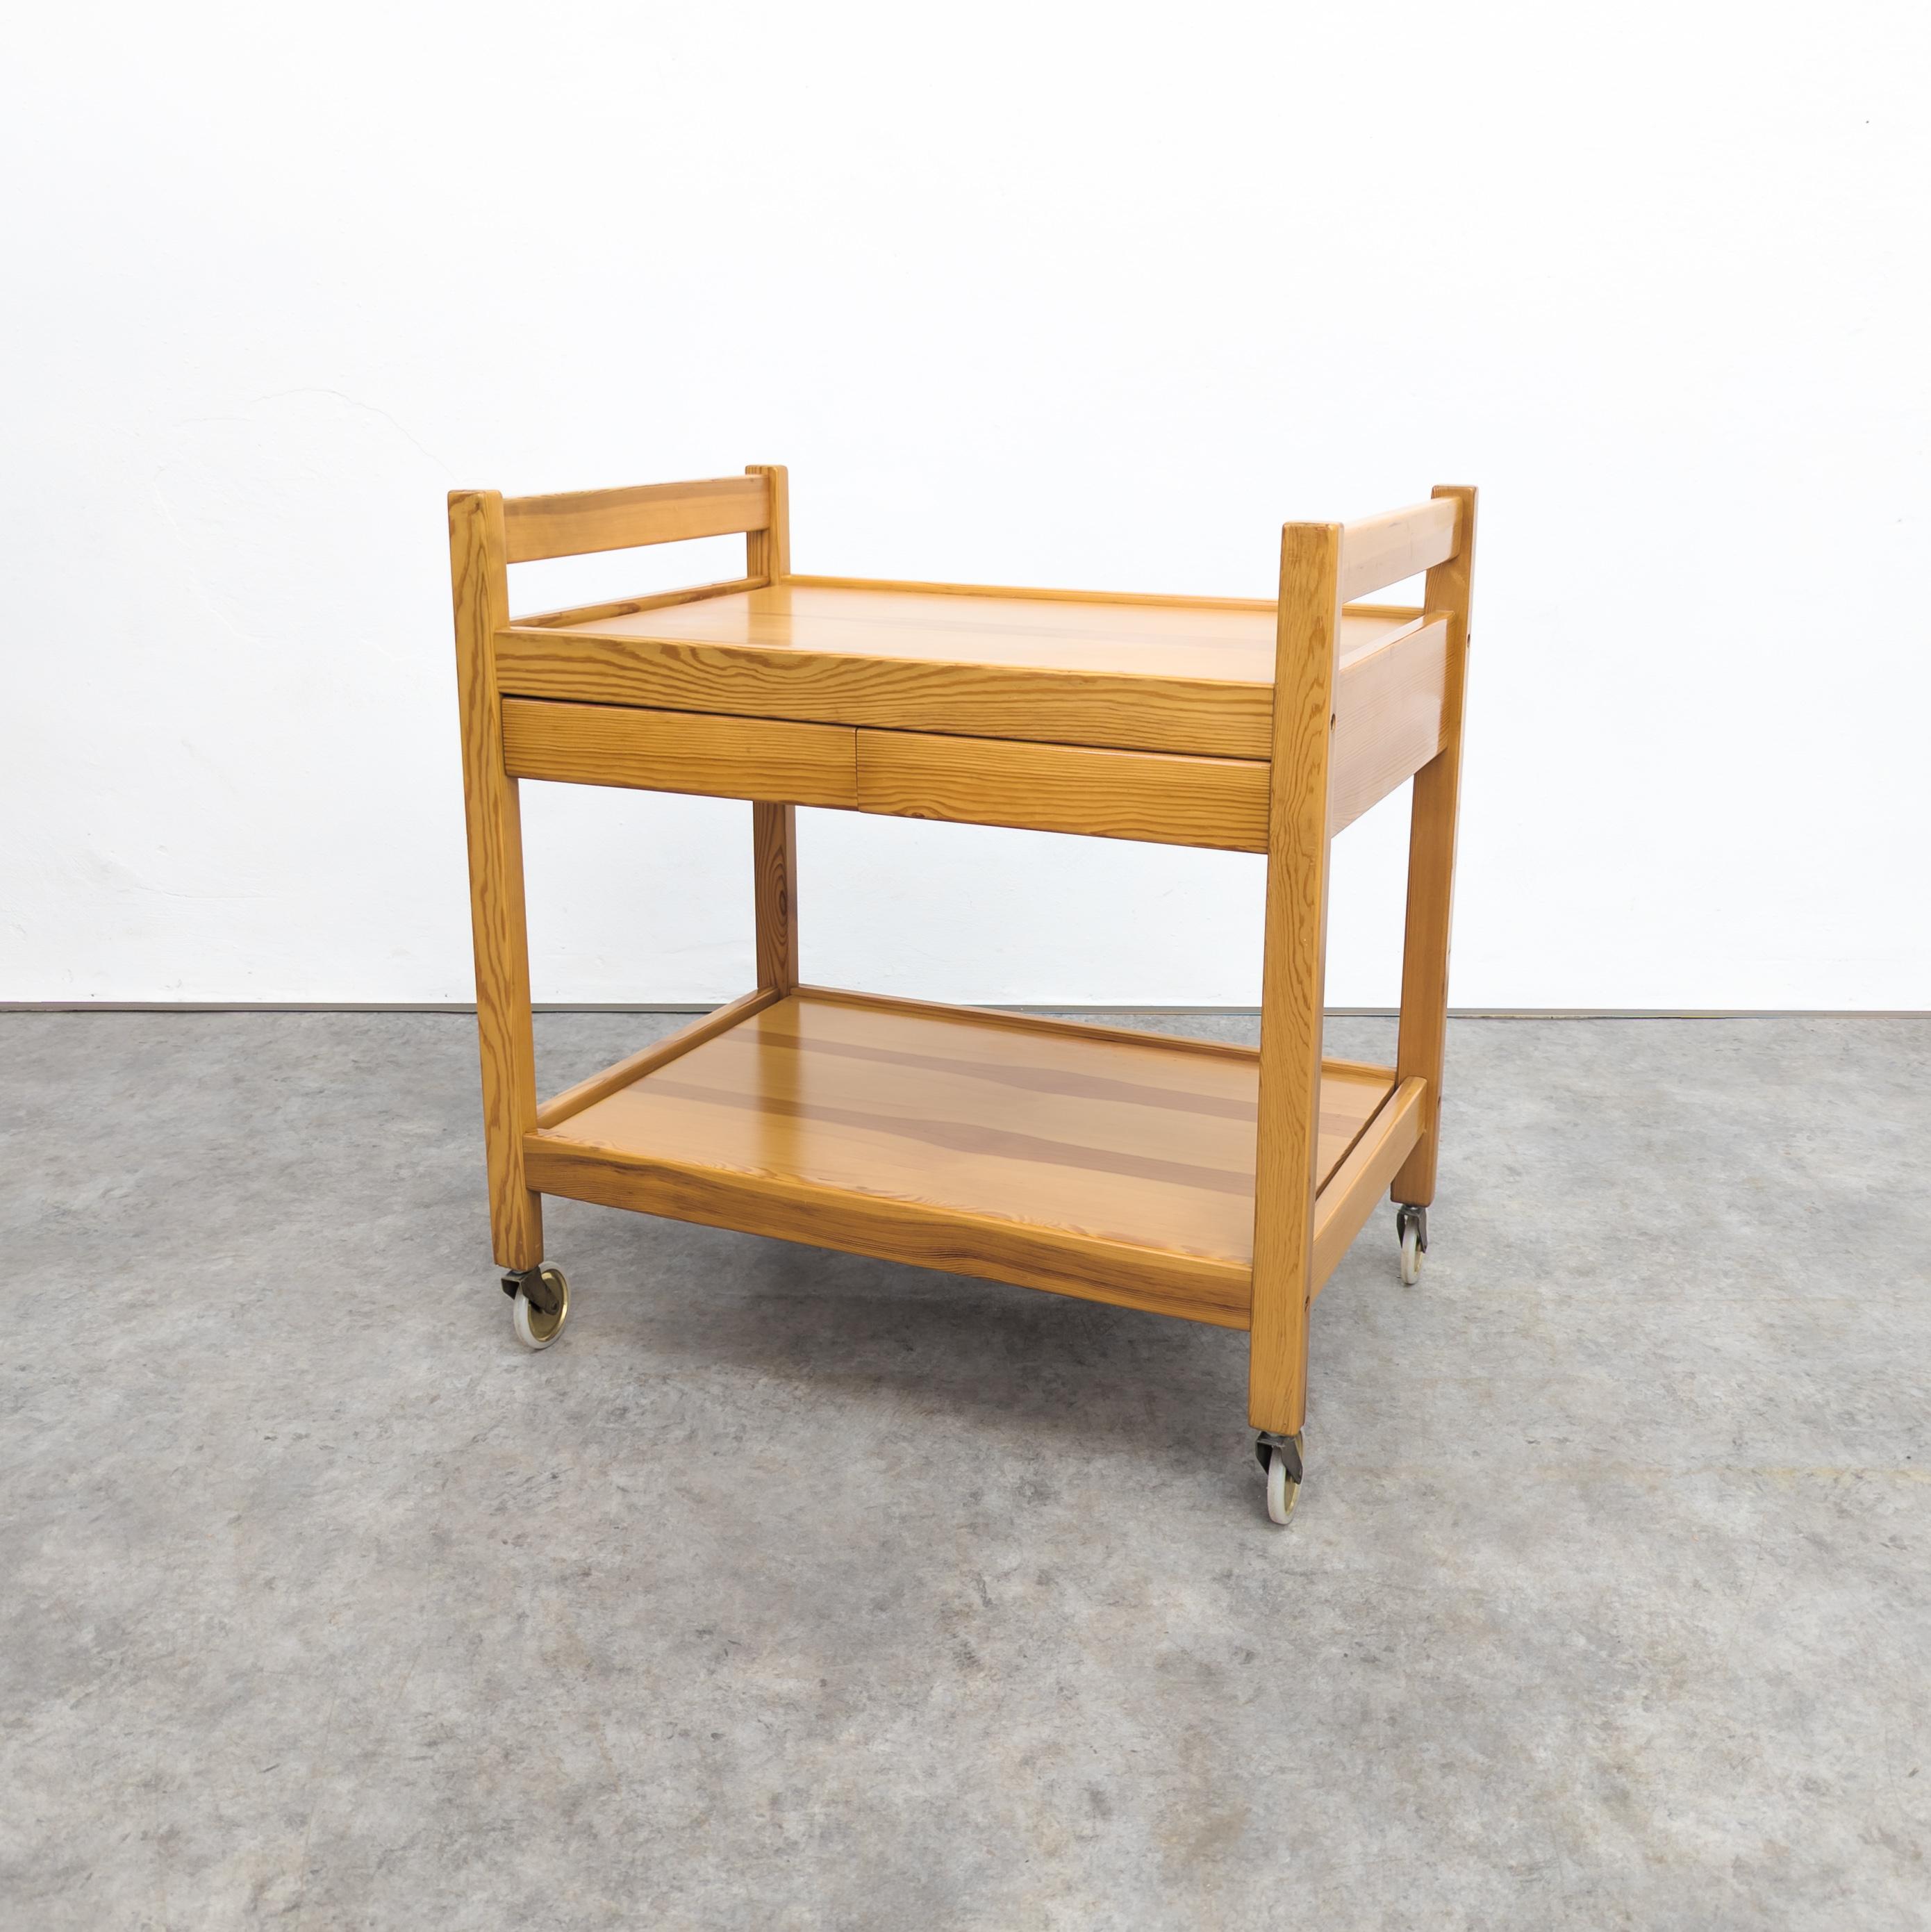 Rare pine wood serving cart designed by Erik Wørts for Ikea in 1977 and stayed in production for only two years. In very good original condition. Height 74 cm, width 70 cm, depth 47 cm. Can be shipped disassembled flat packed.